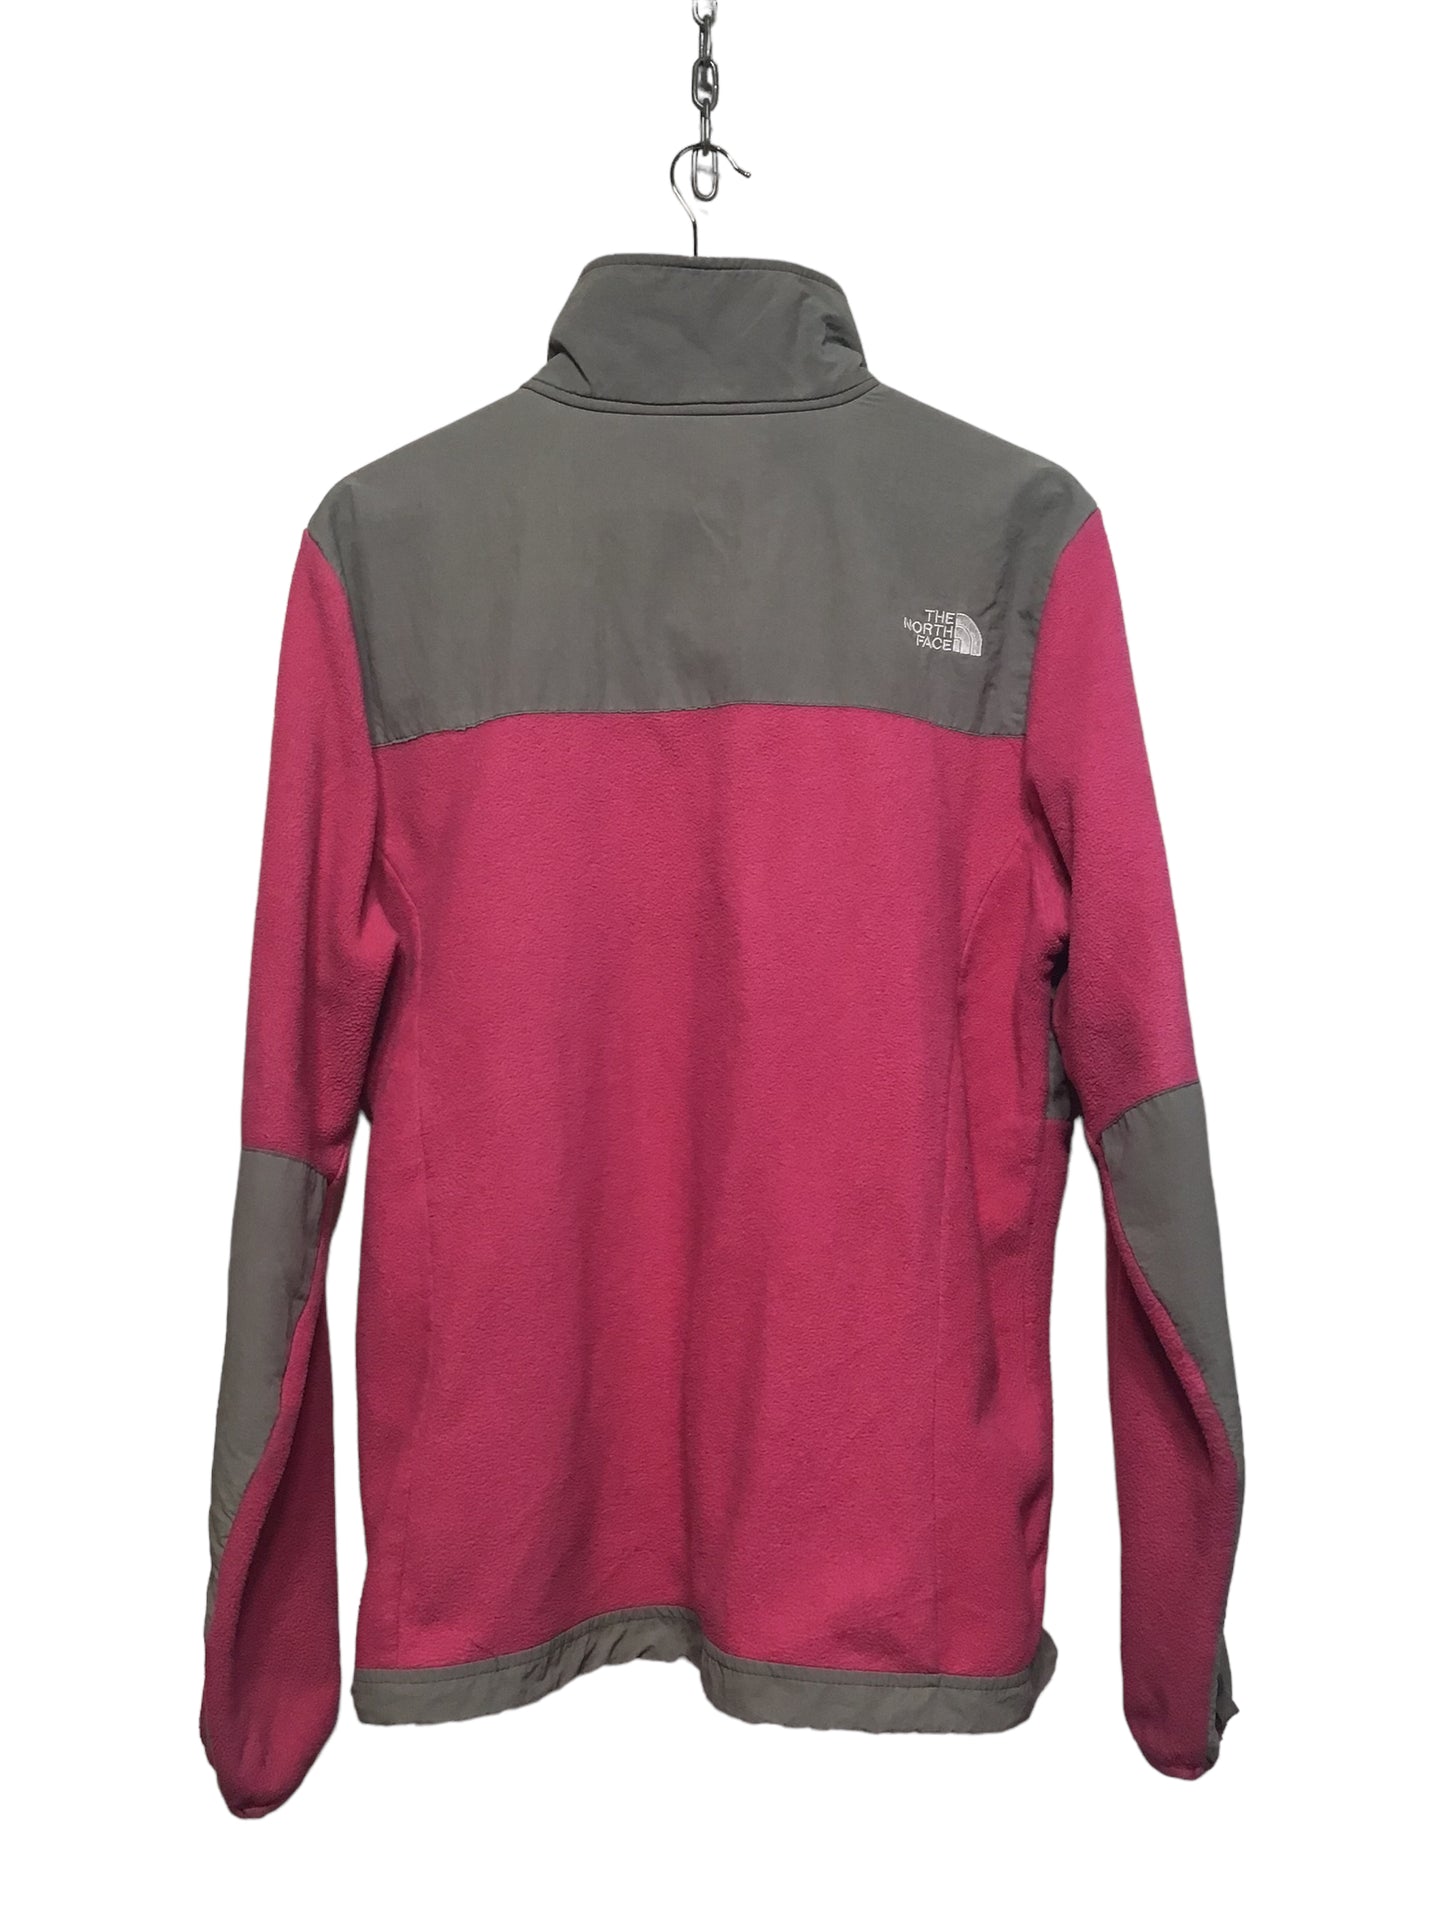 The North Face Pink Denali Jacket (Women’s Size XL)